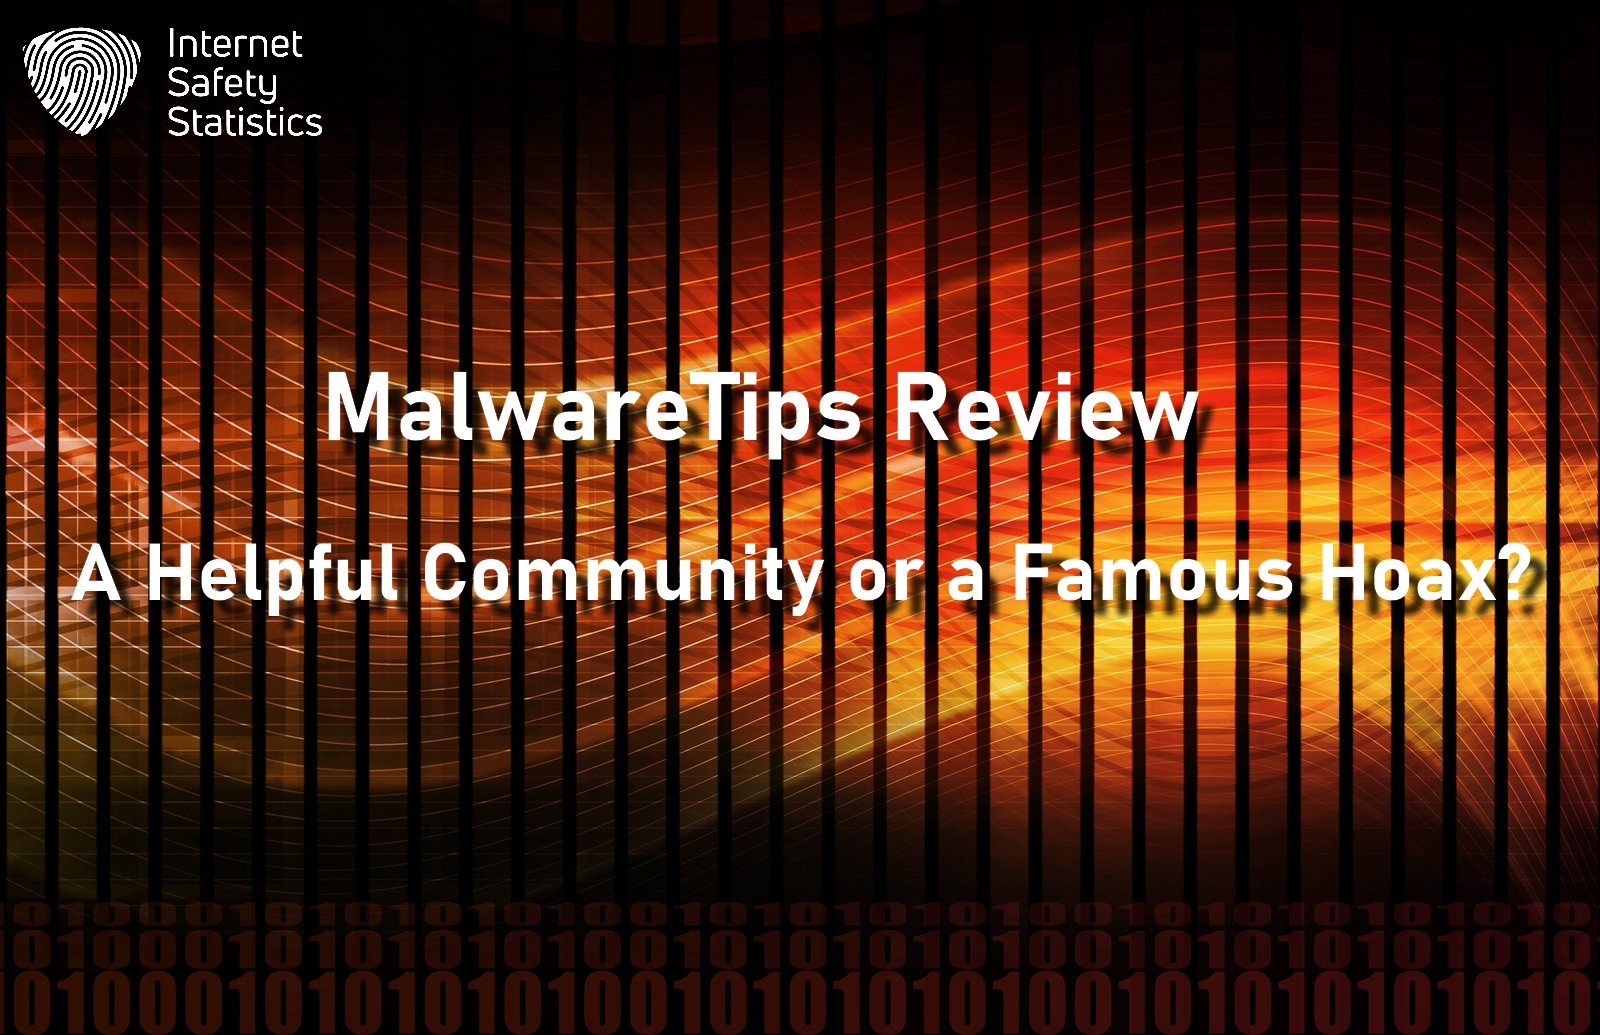 MalwareTips Review: A Helpful Community or a Famous Hoax?